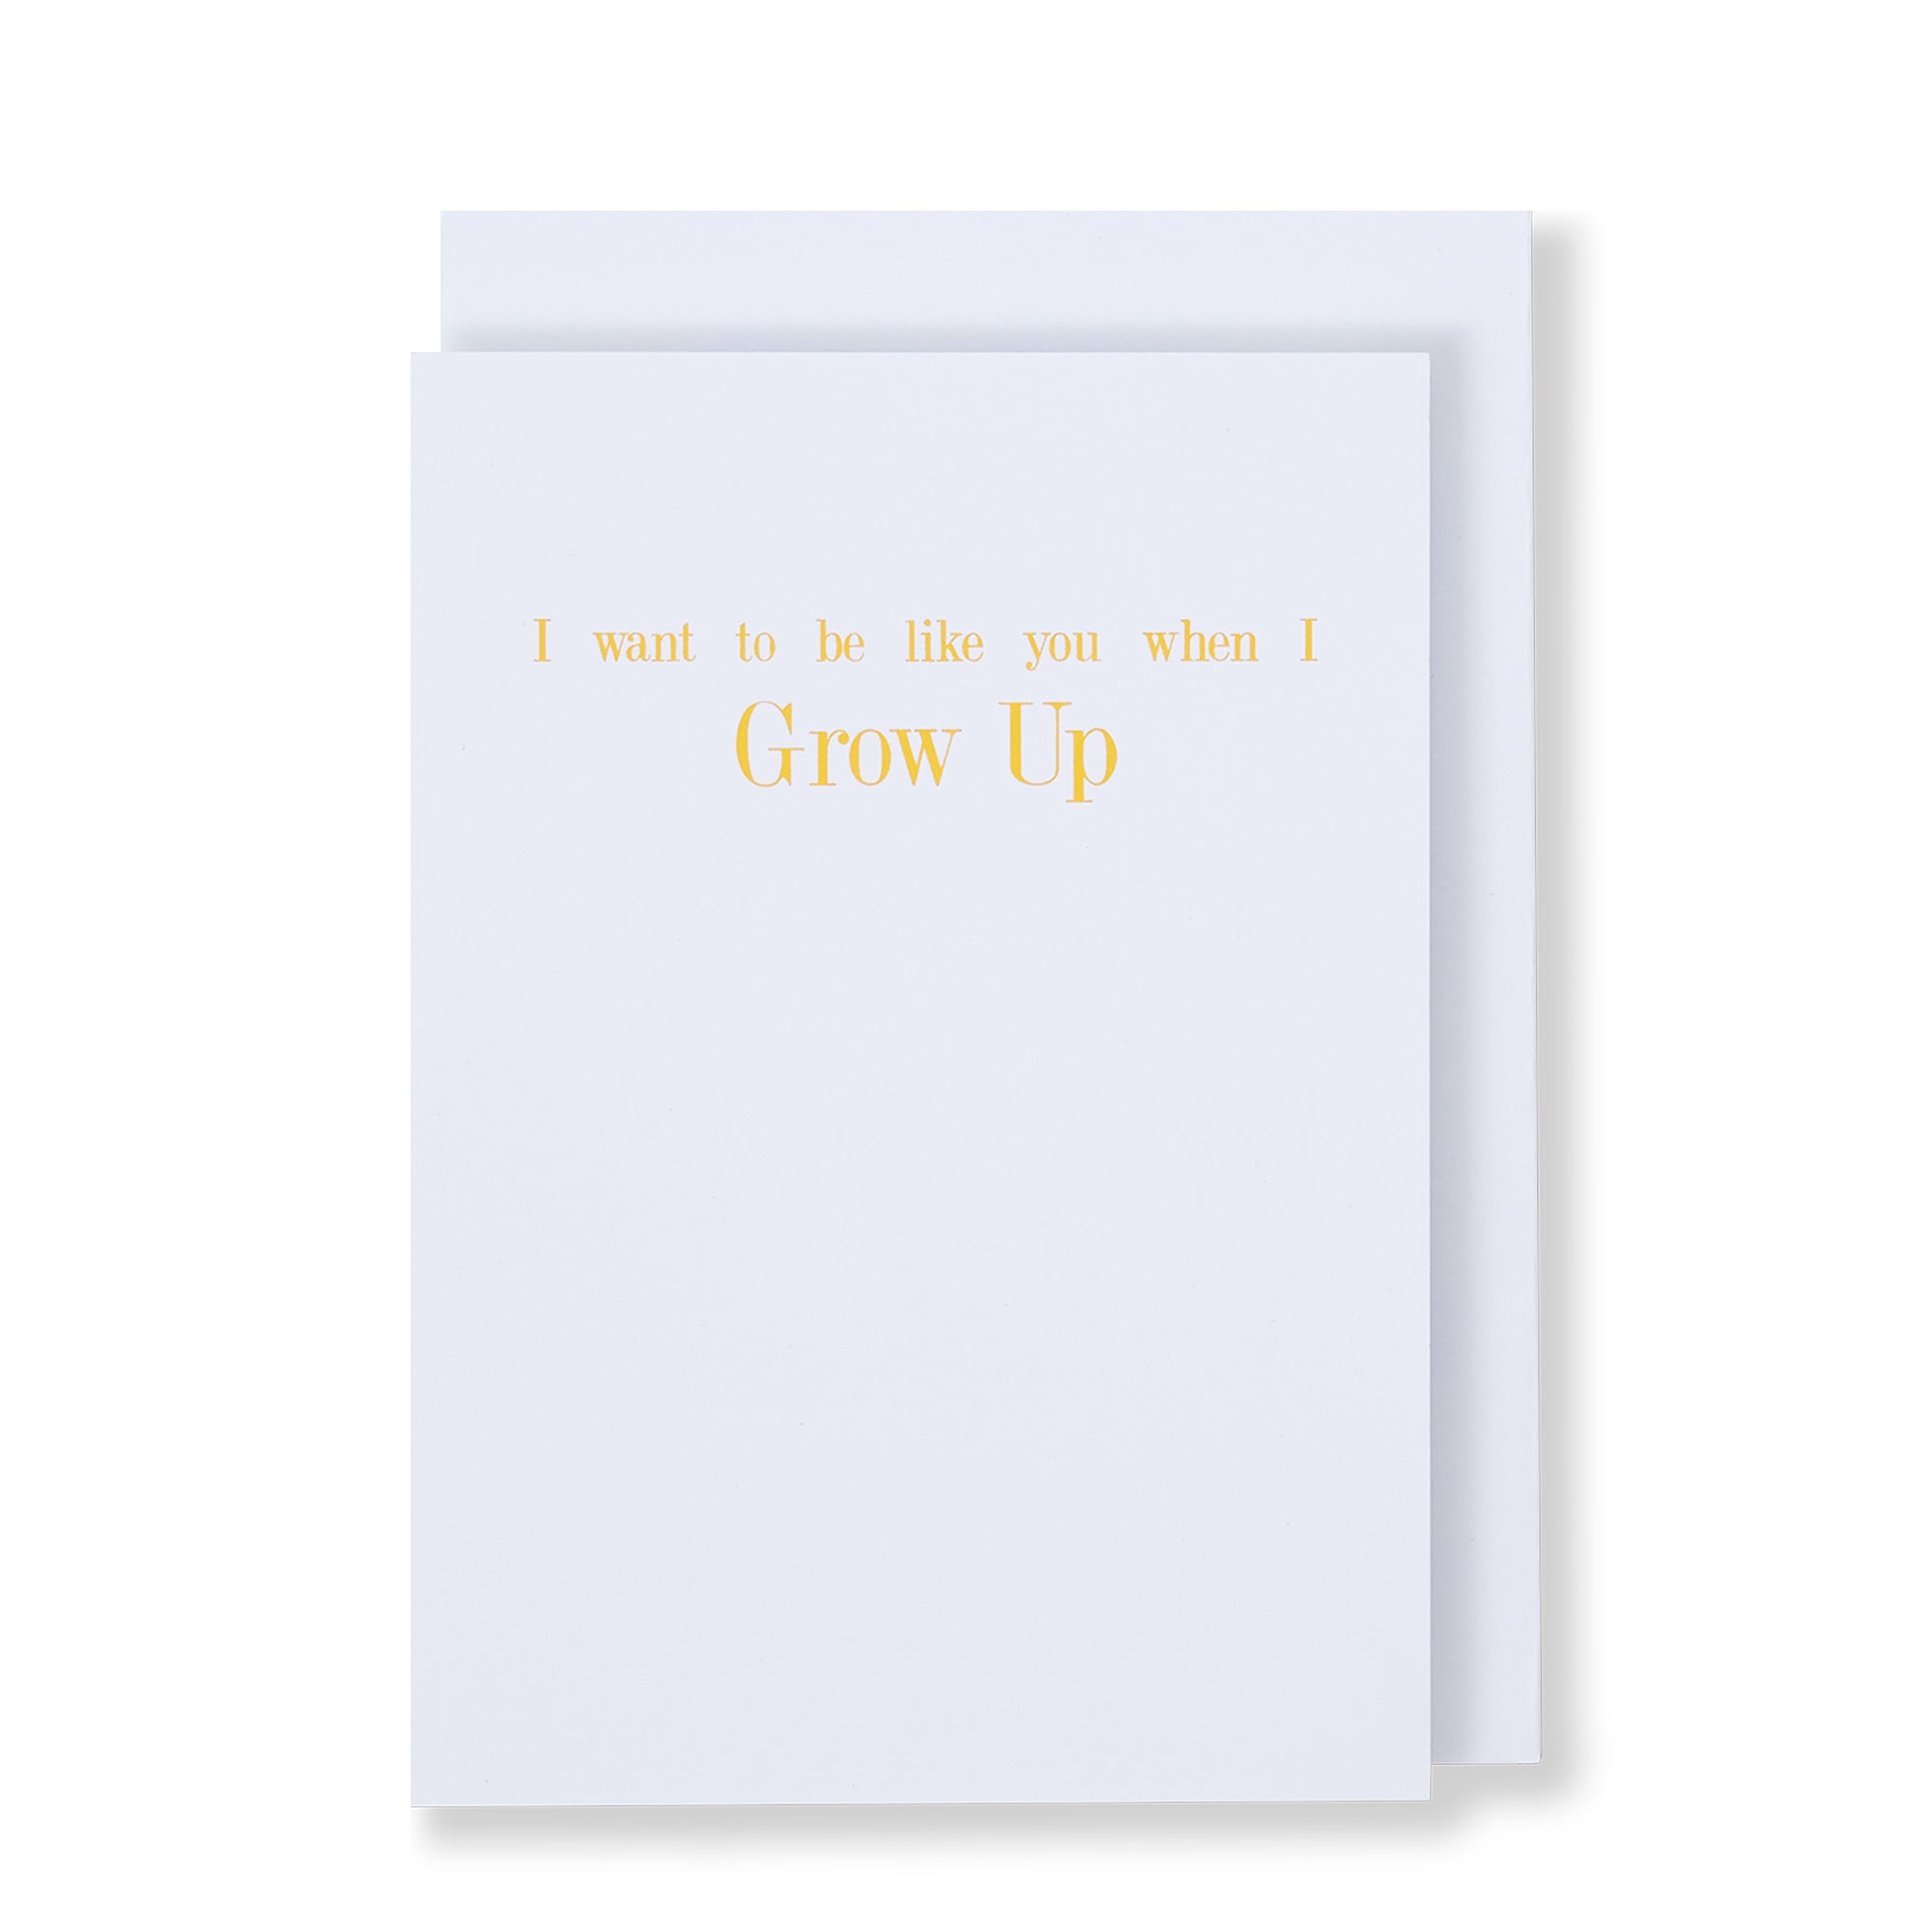 I Want To Be Like You When I Grow Up Greeting Card in White, Front